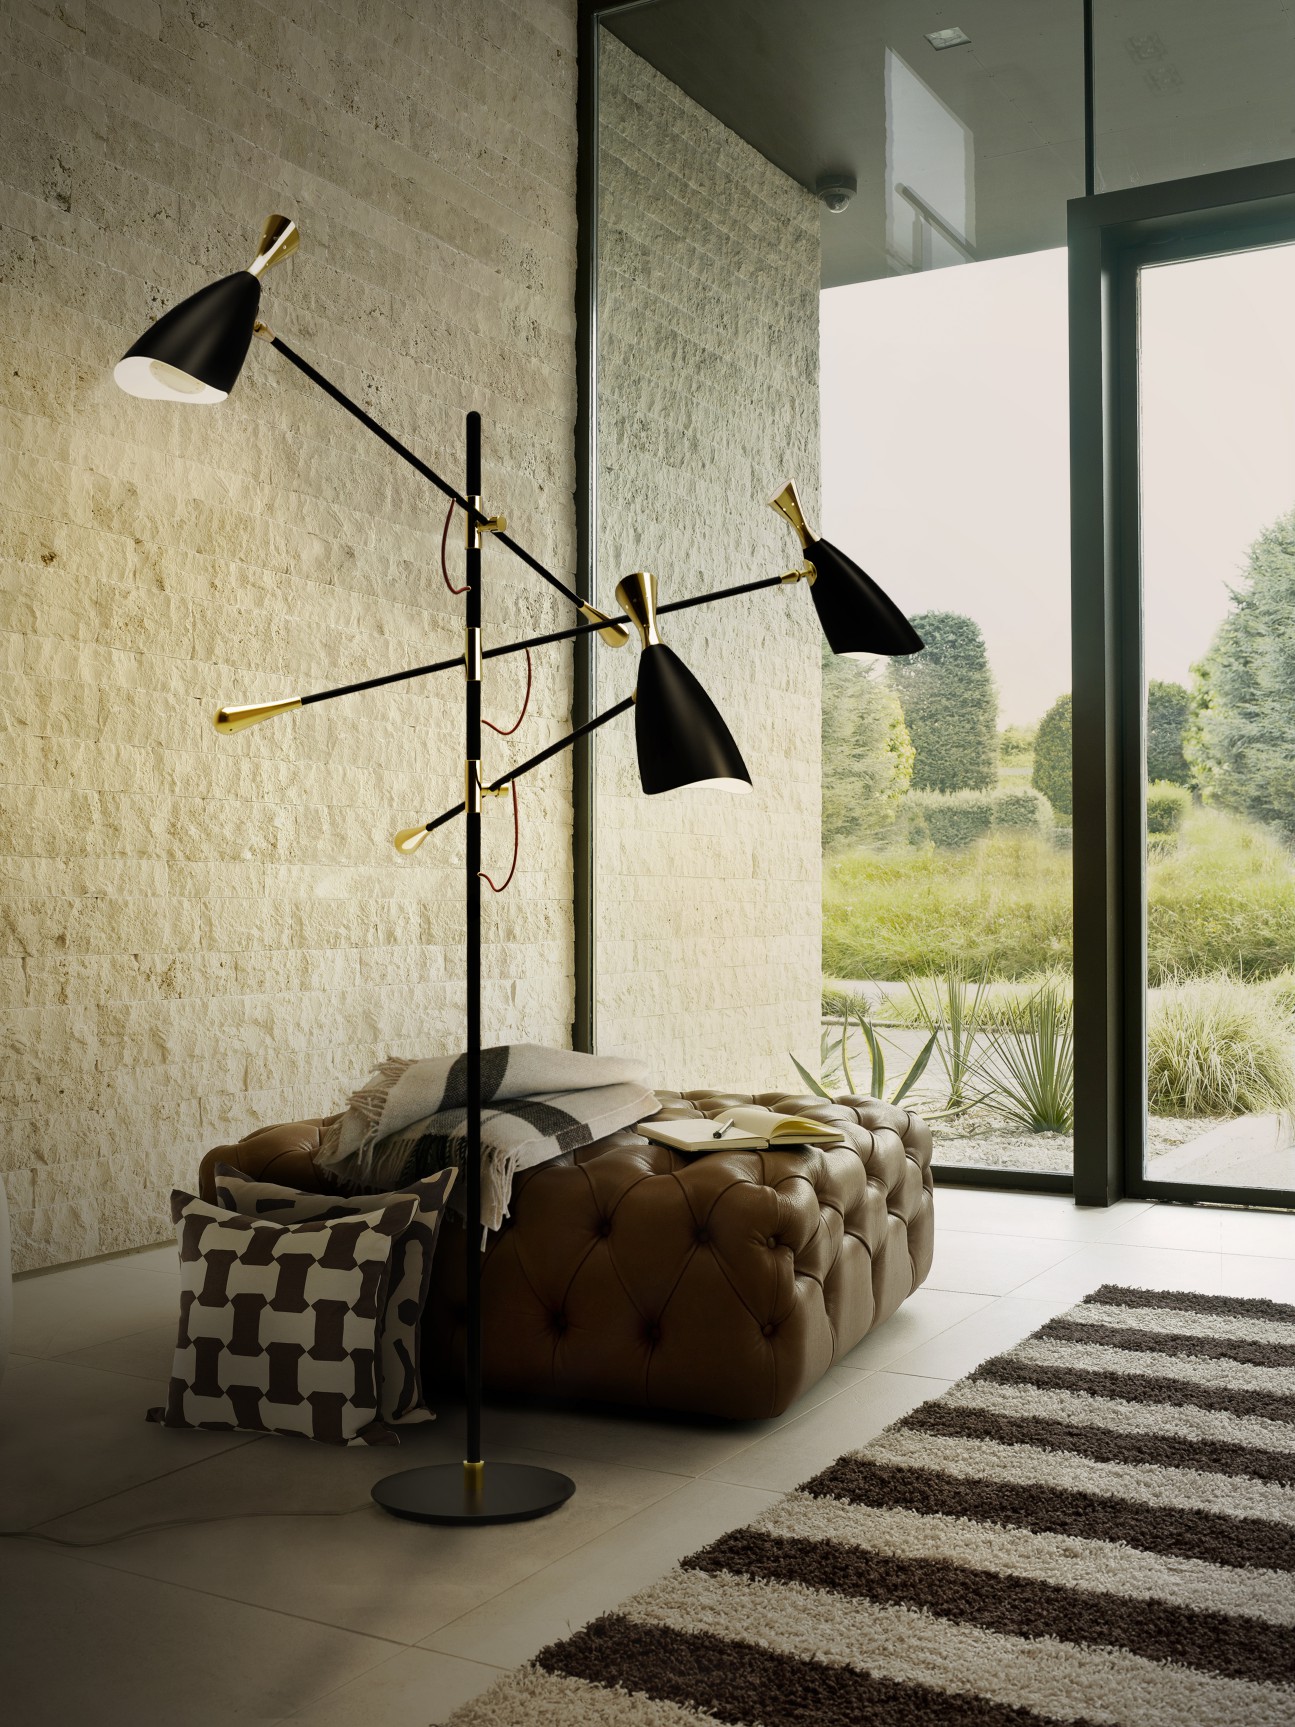 Lighting Pieces For Black Friday, Floor Lamp Black Friday